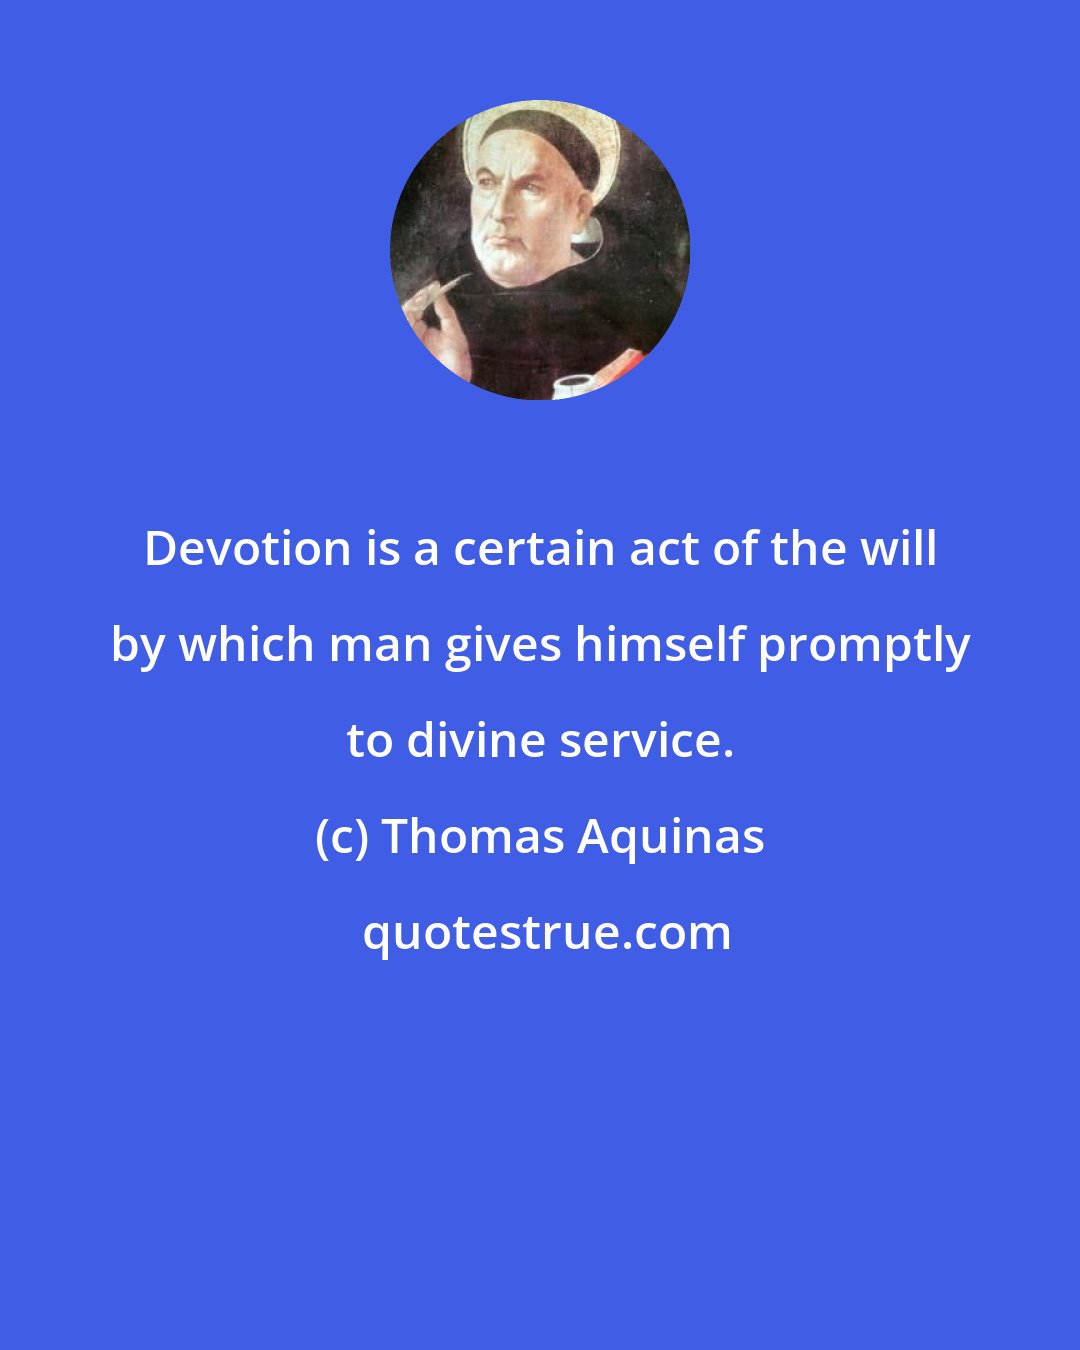 Thomas Aquinas: Devotion is a certain act of the will by which man gives himself promptly to divine service.